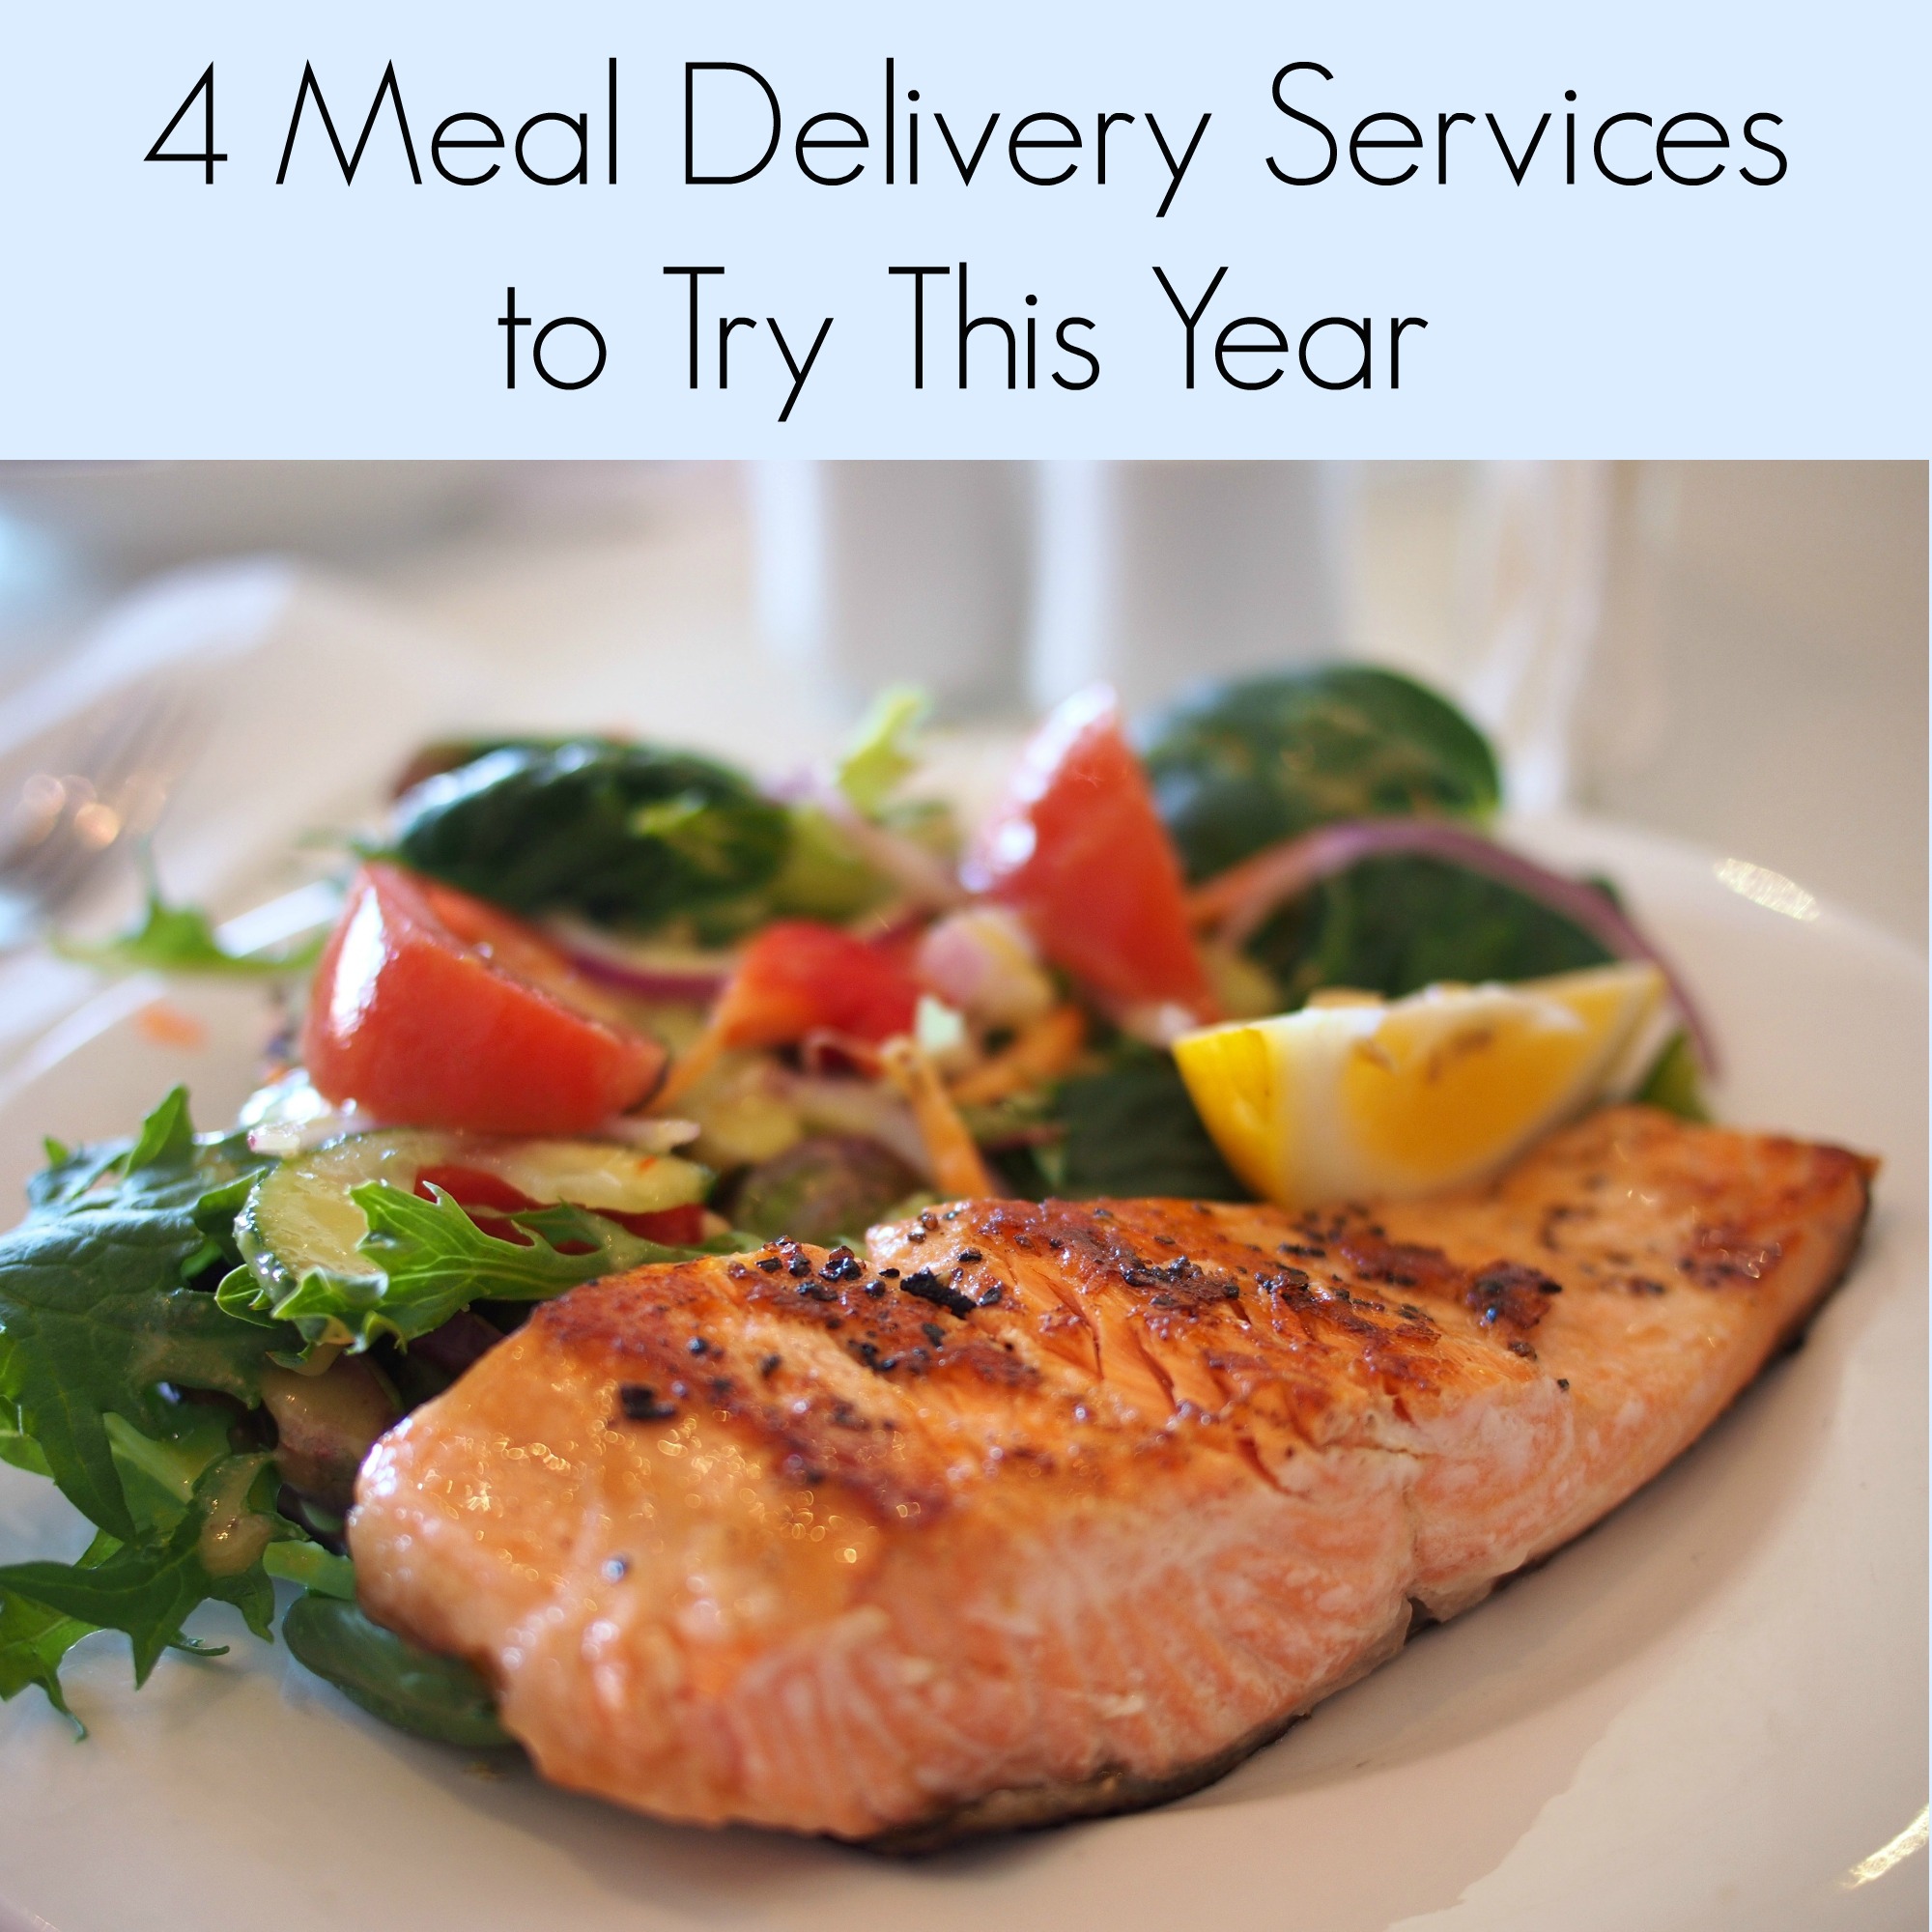 Meal Delivery Services